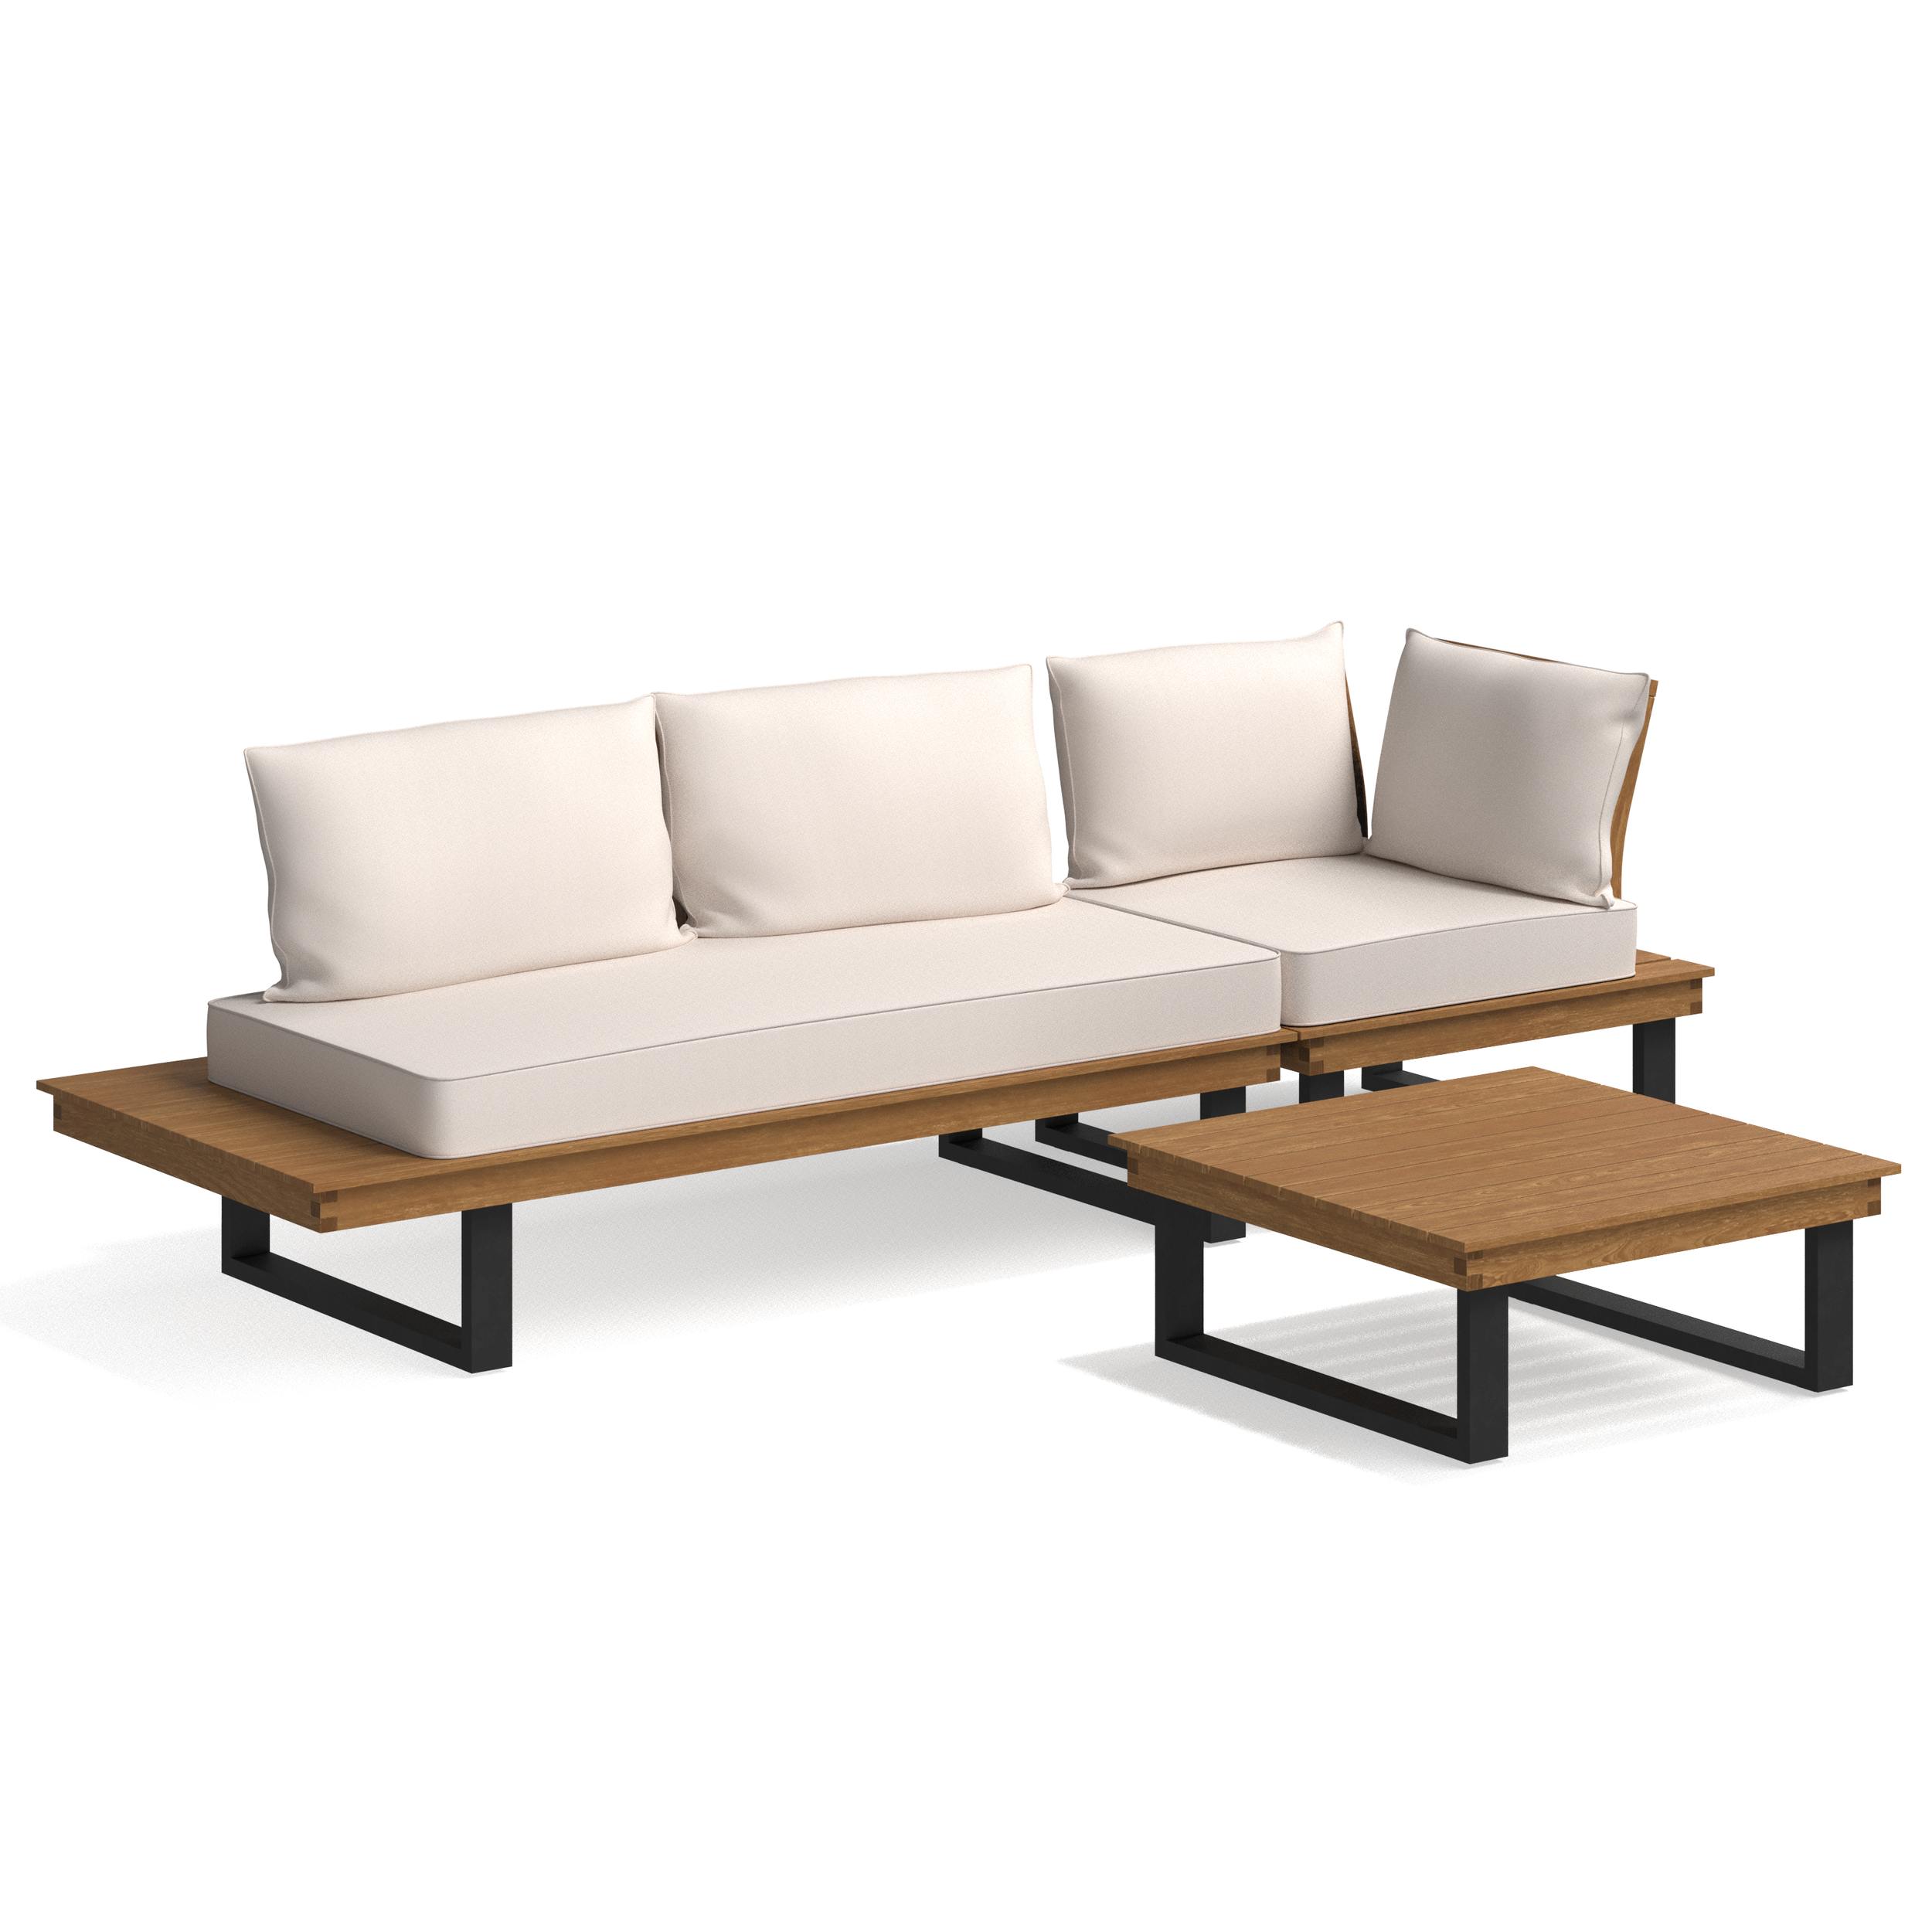 Wooden Deck couch and Table